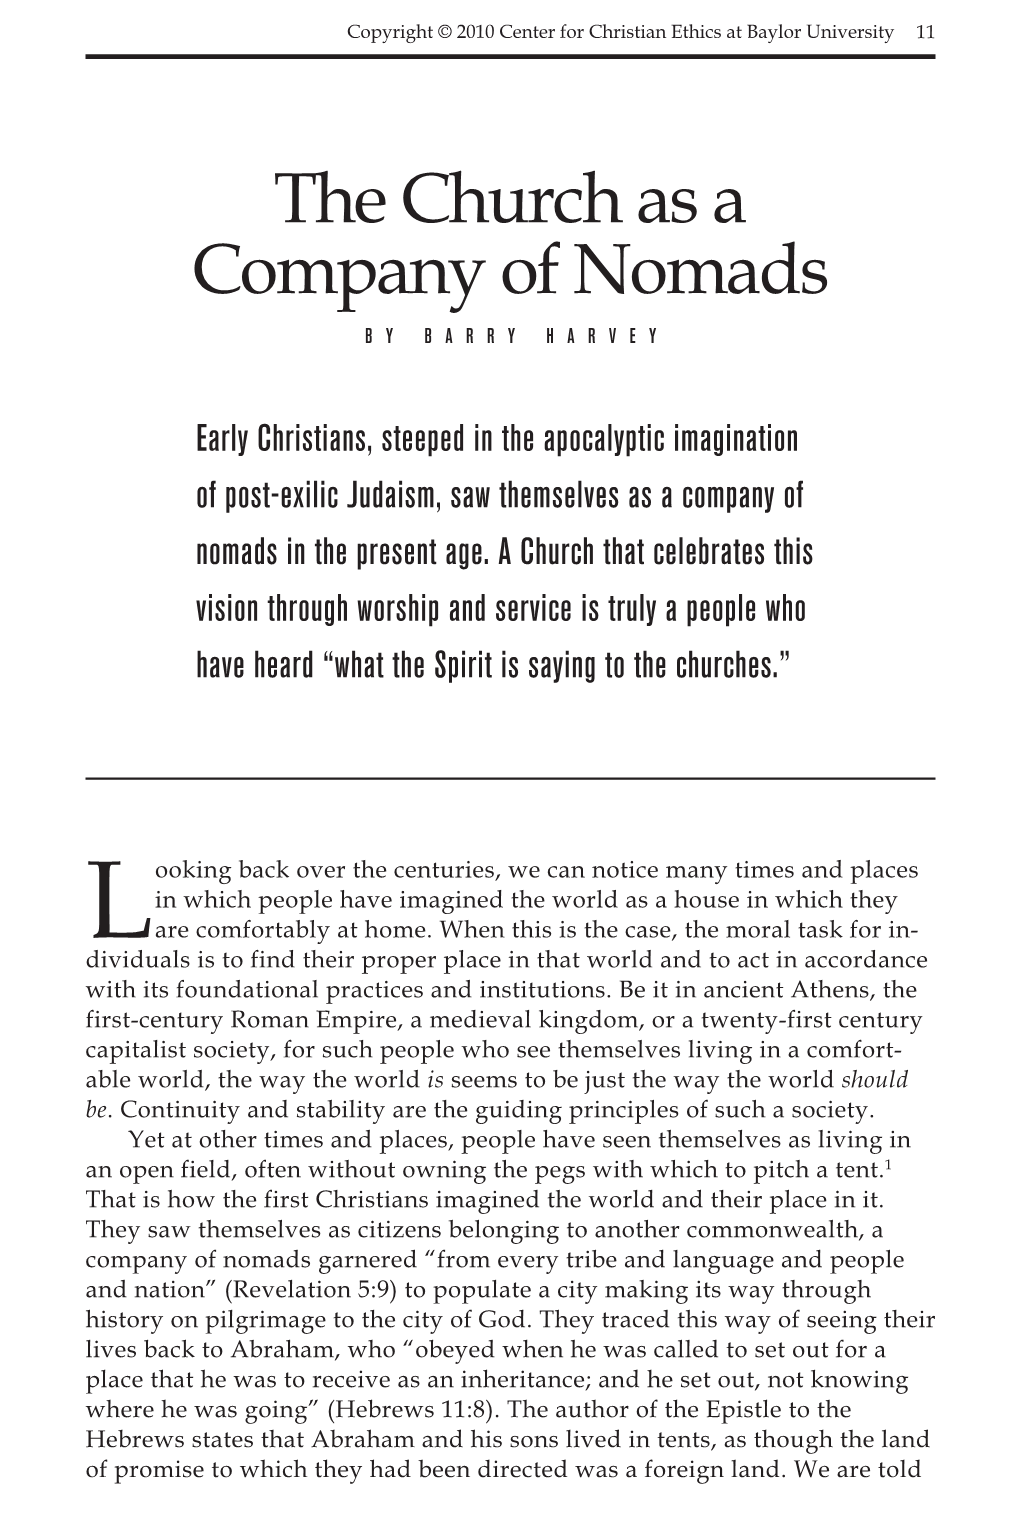 The Church As a Company of Nomads by Barry Harvey